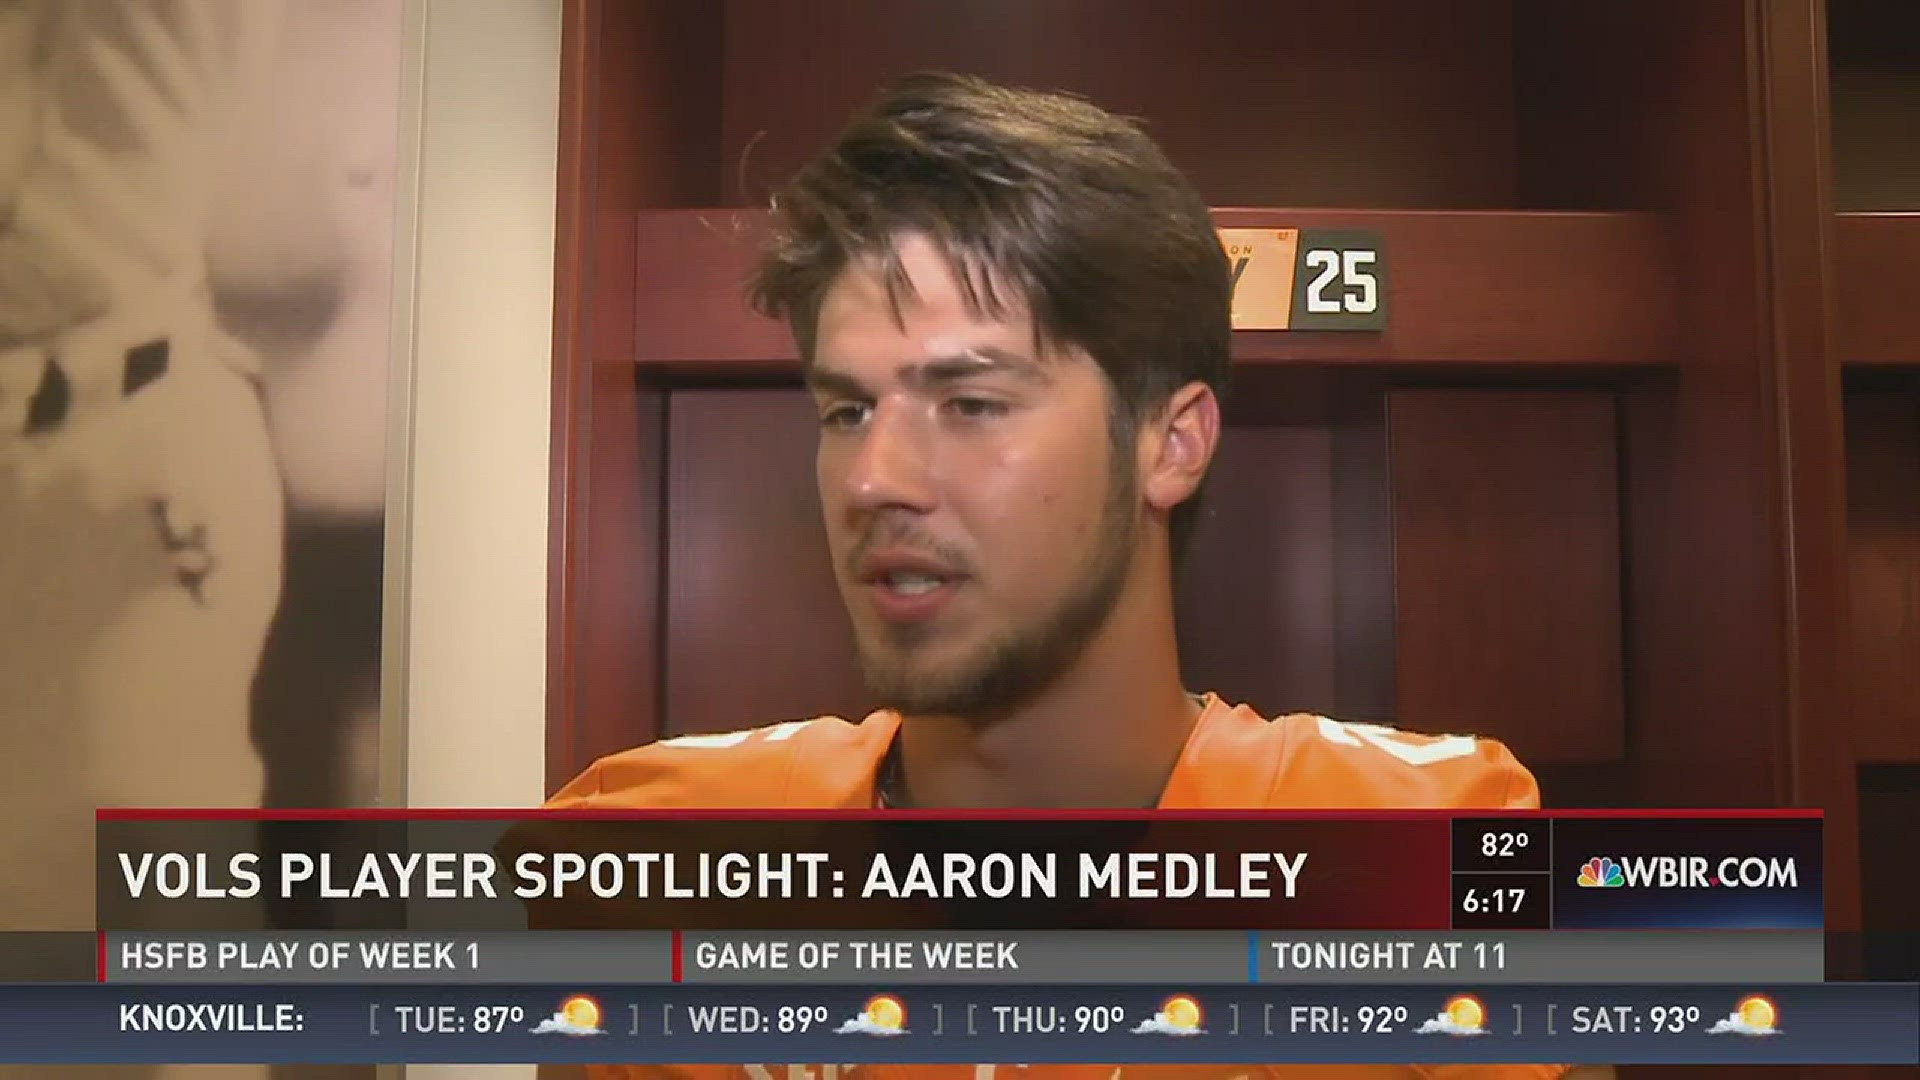 Get to know Aaron Medley.